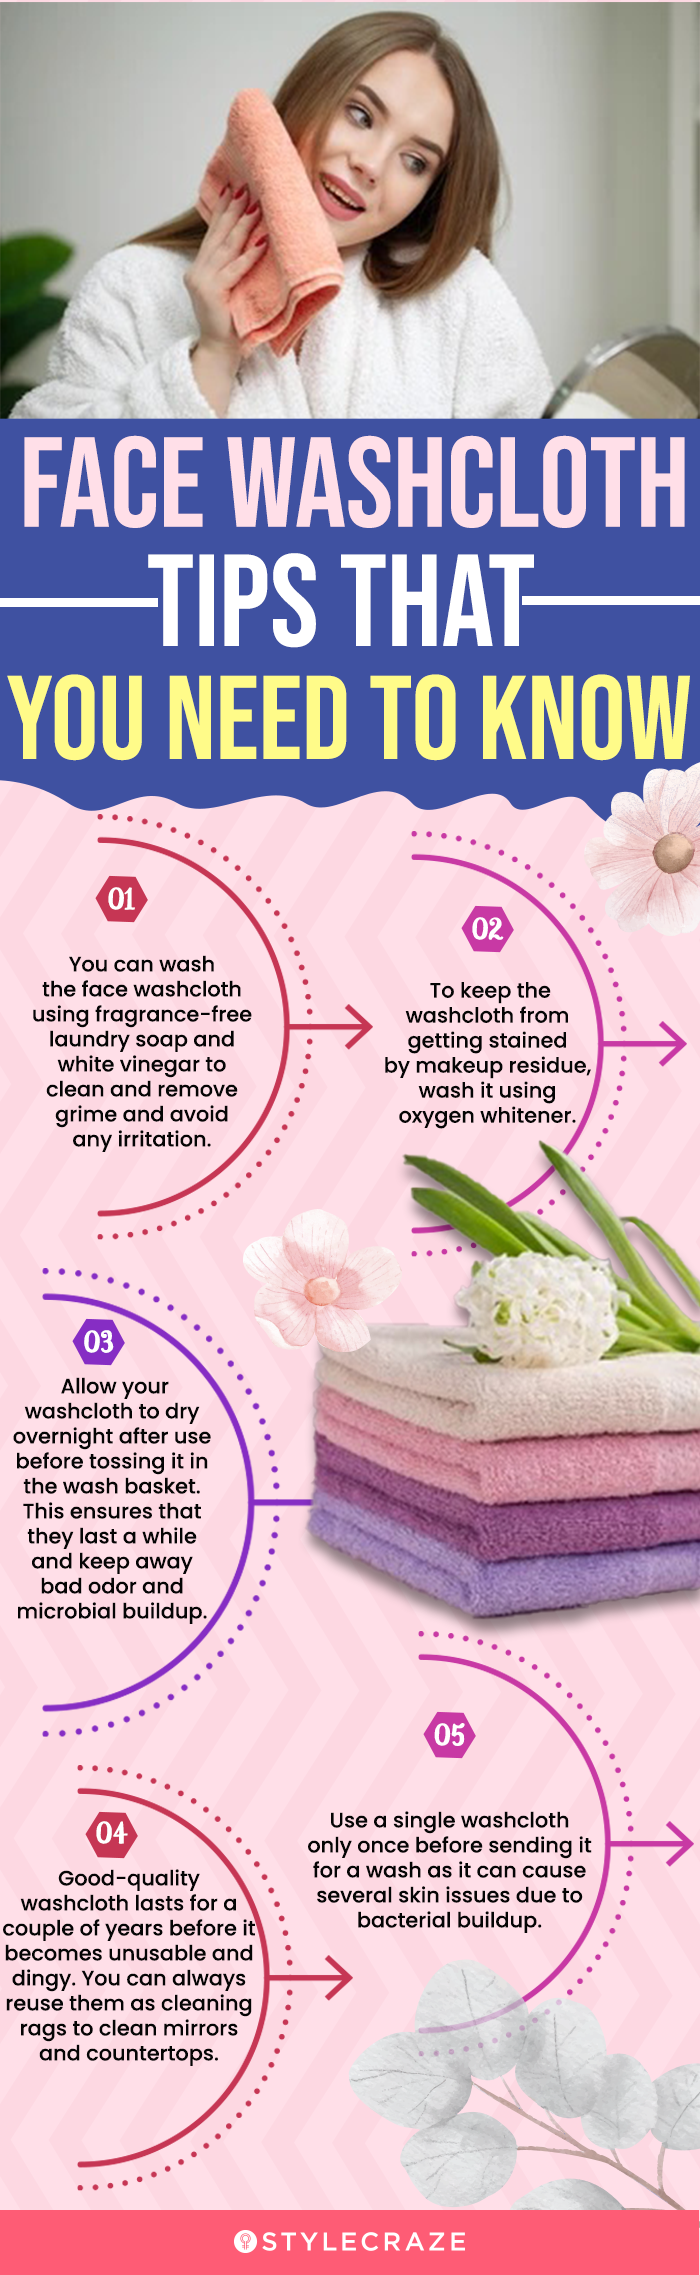 https://cdn2.stylecraze.com/wp-content/uploads/2020/08/Face-Washcloth-Tips-That-You-Need-To-Know.png